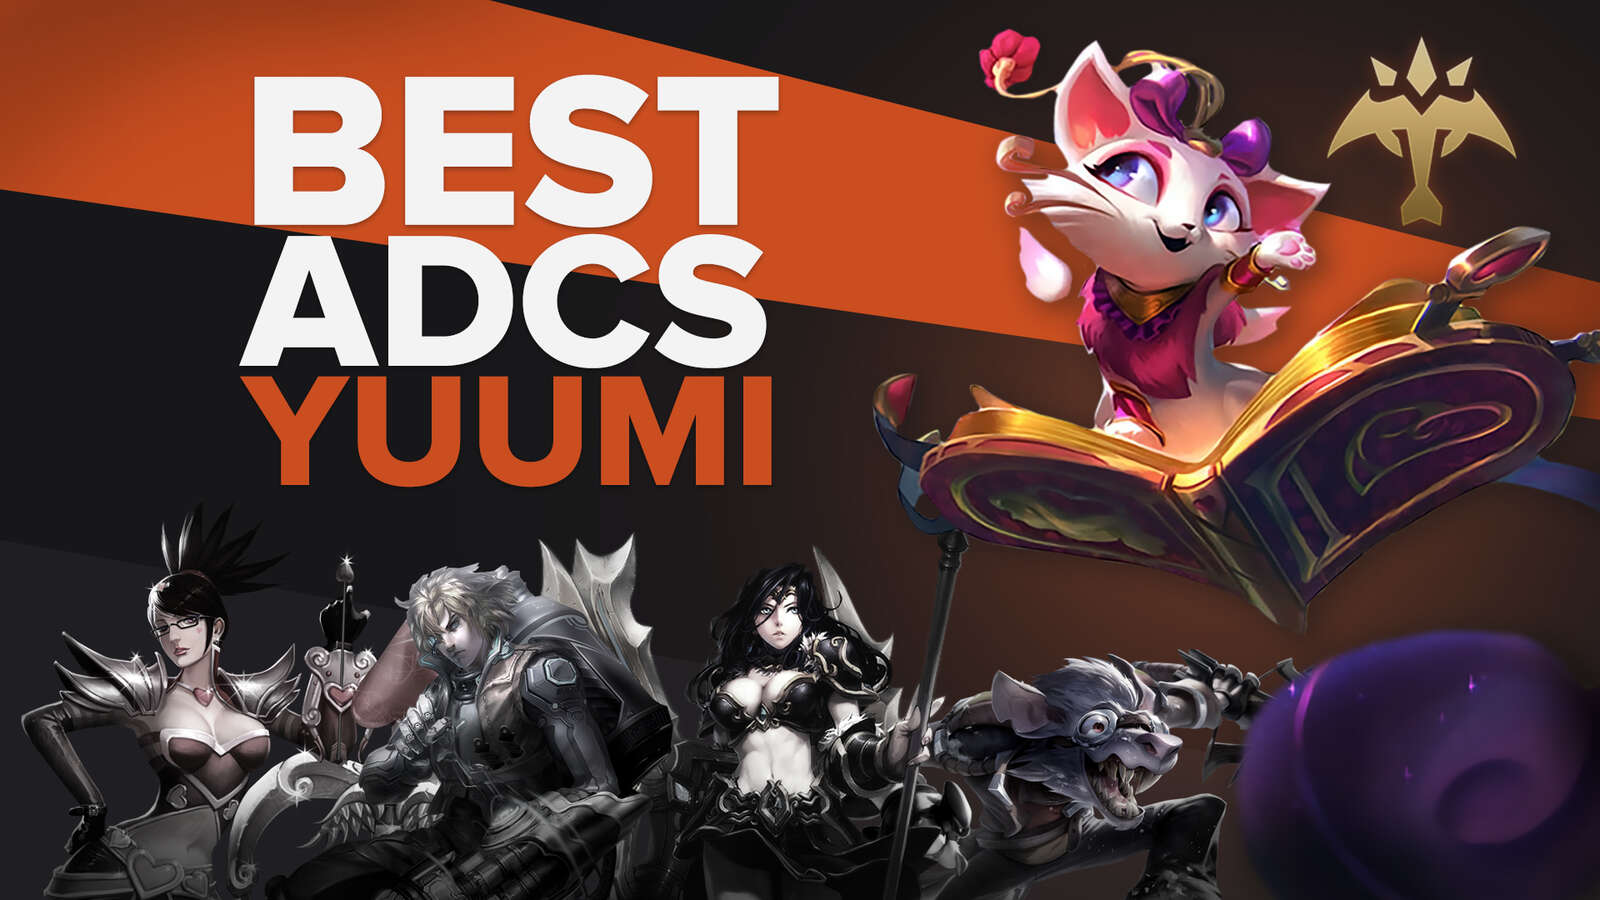 Top 6 League of Legends ADCs to Play With Yuumi